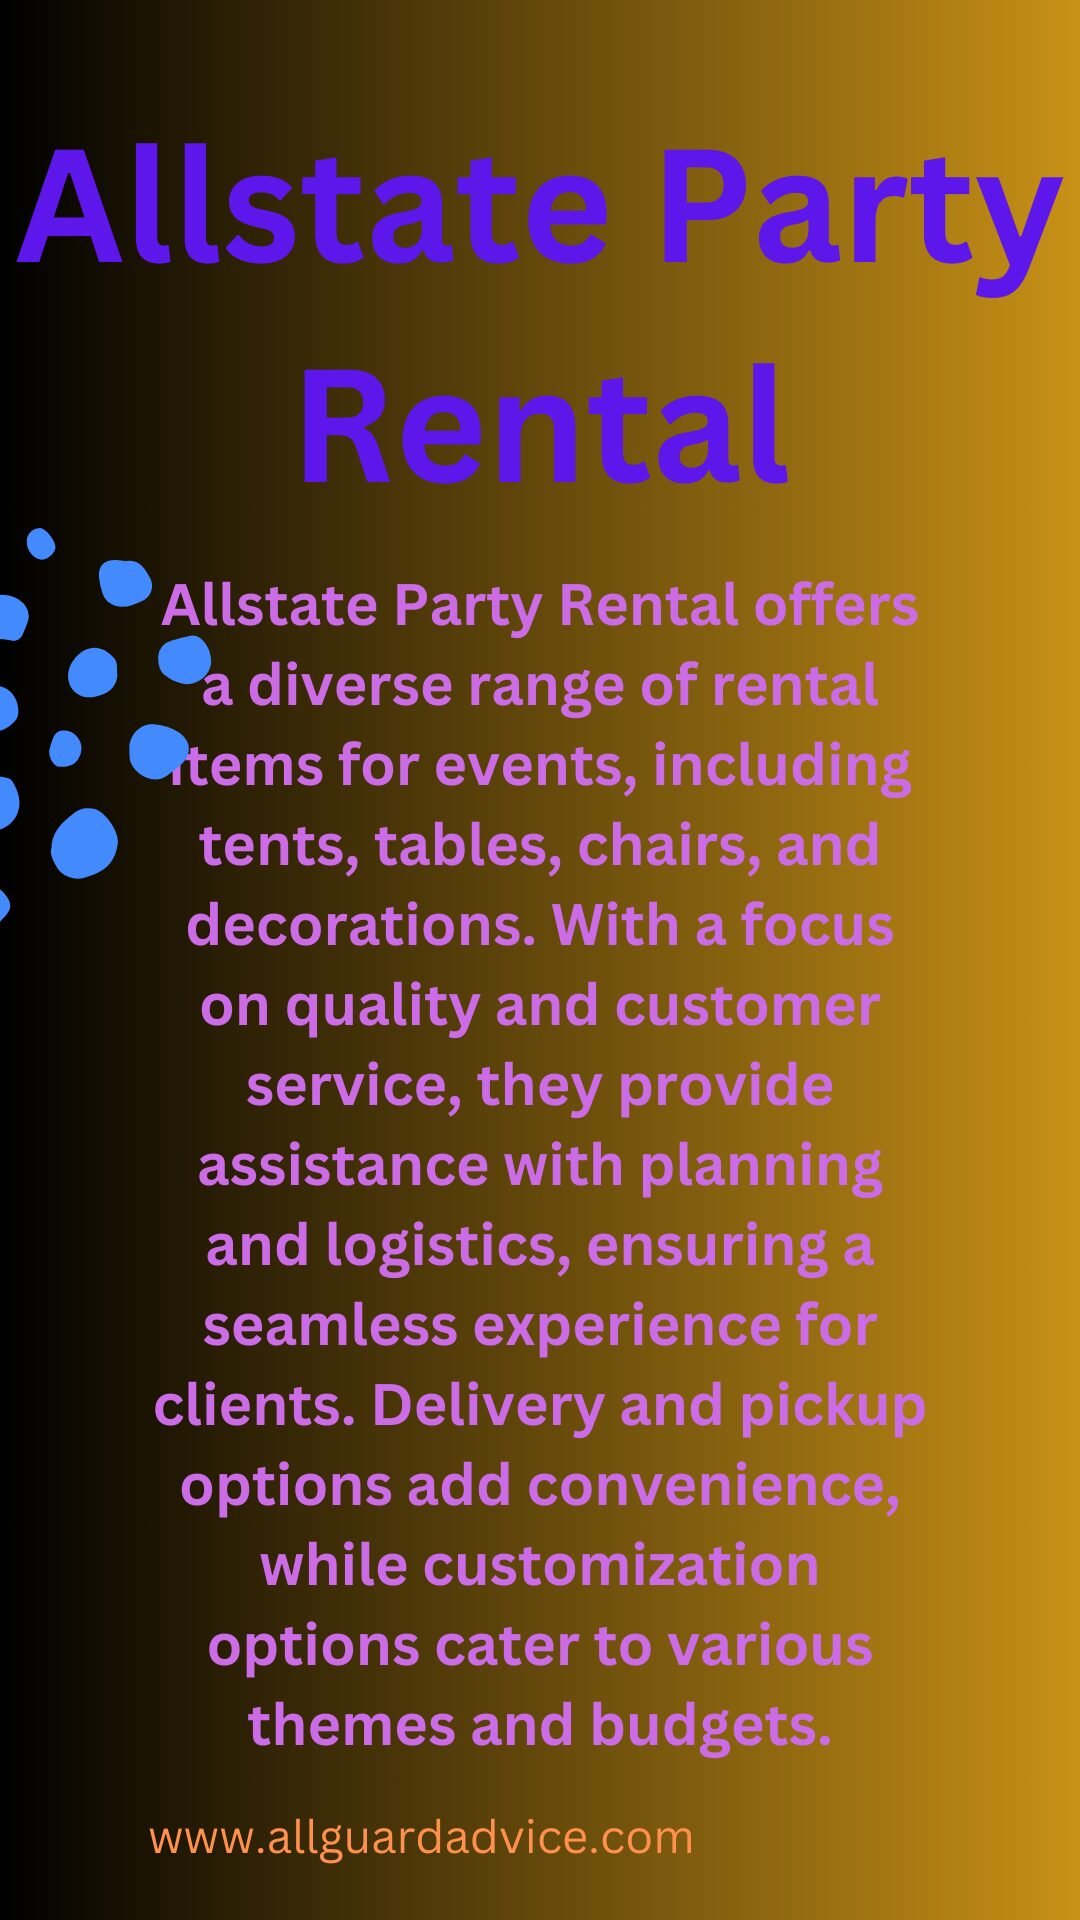 Allstate Party Rental